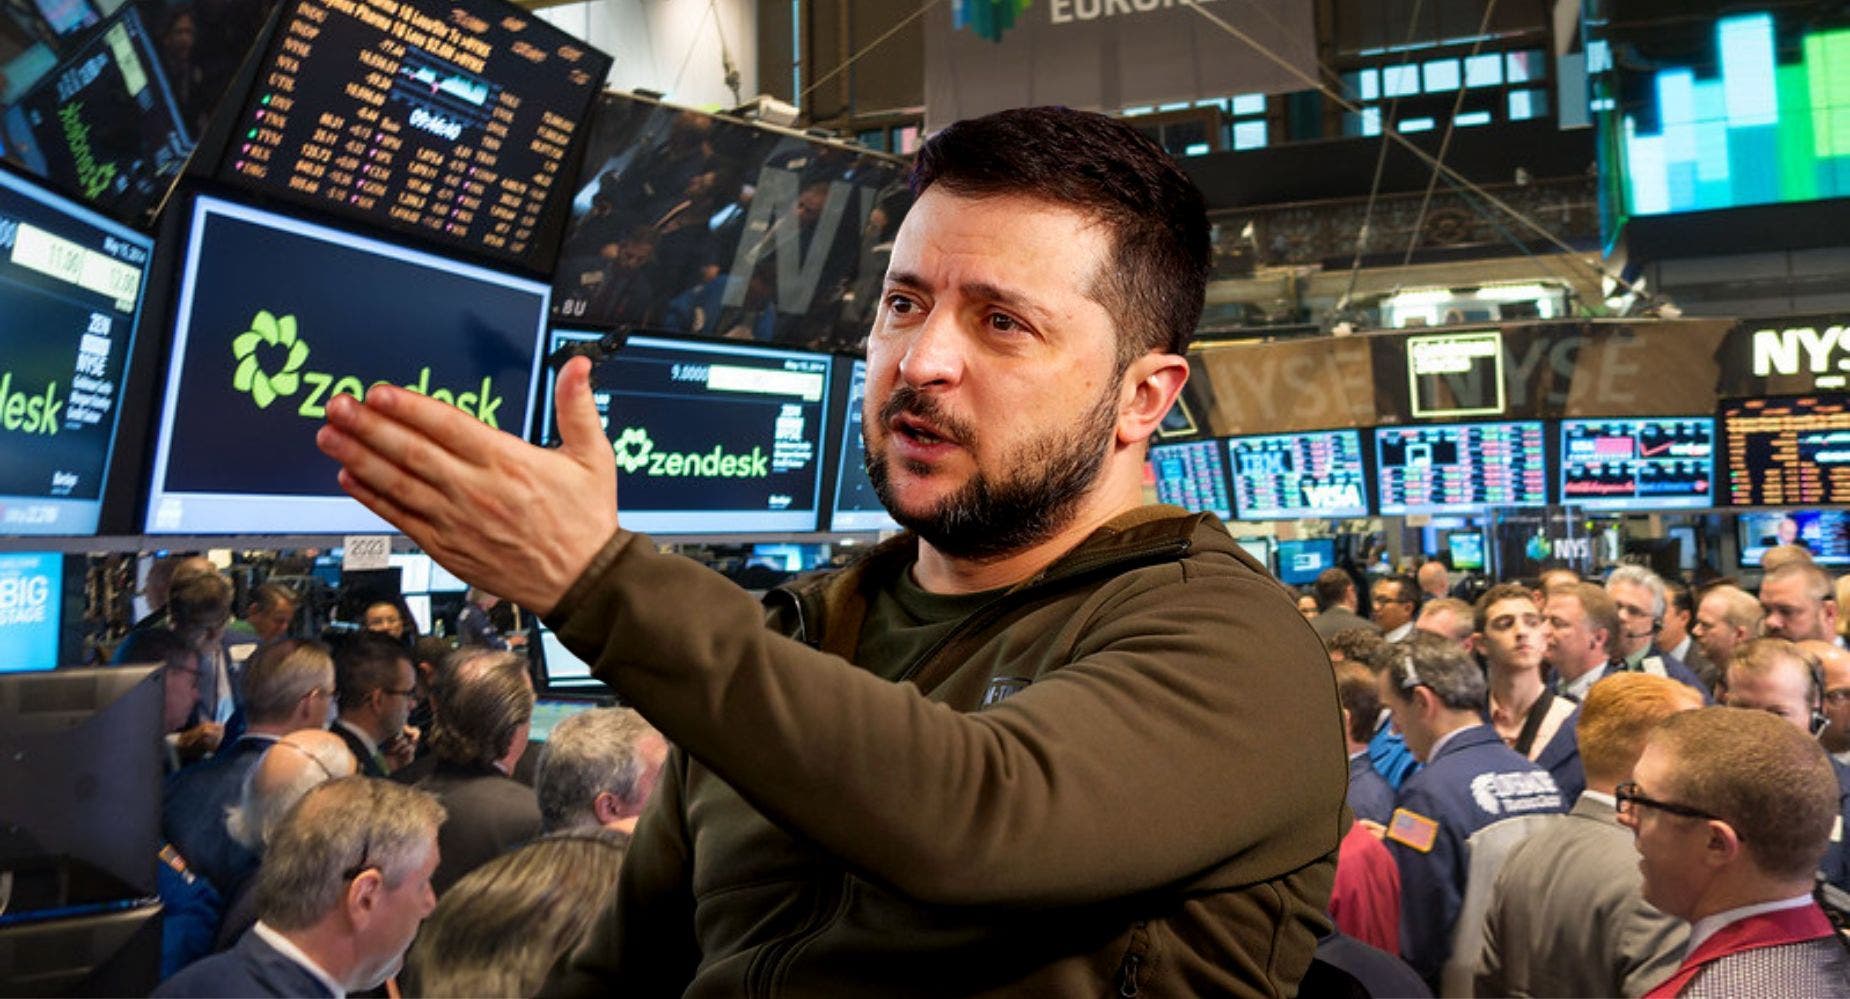 'Share The Victory With Us': President Zelensky Rings NYSE Bell Virtually, Welcomes Investment In Ukraine